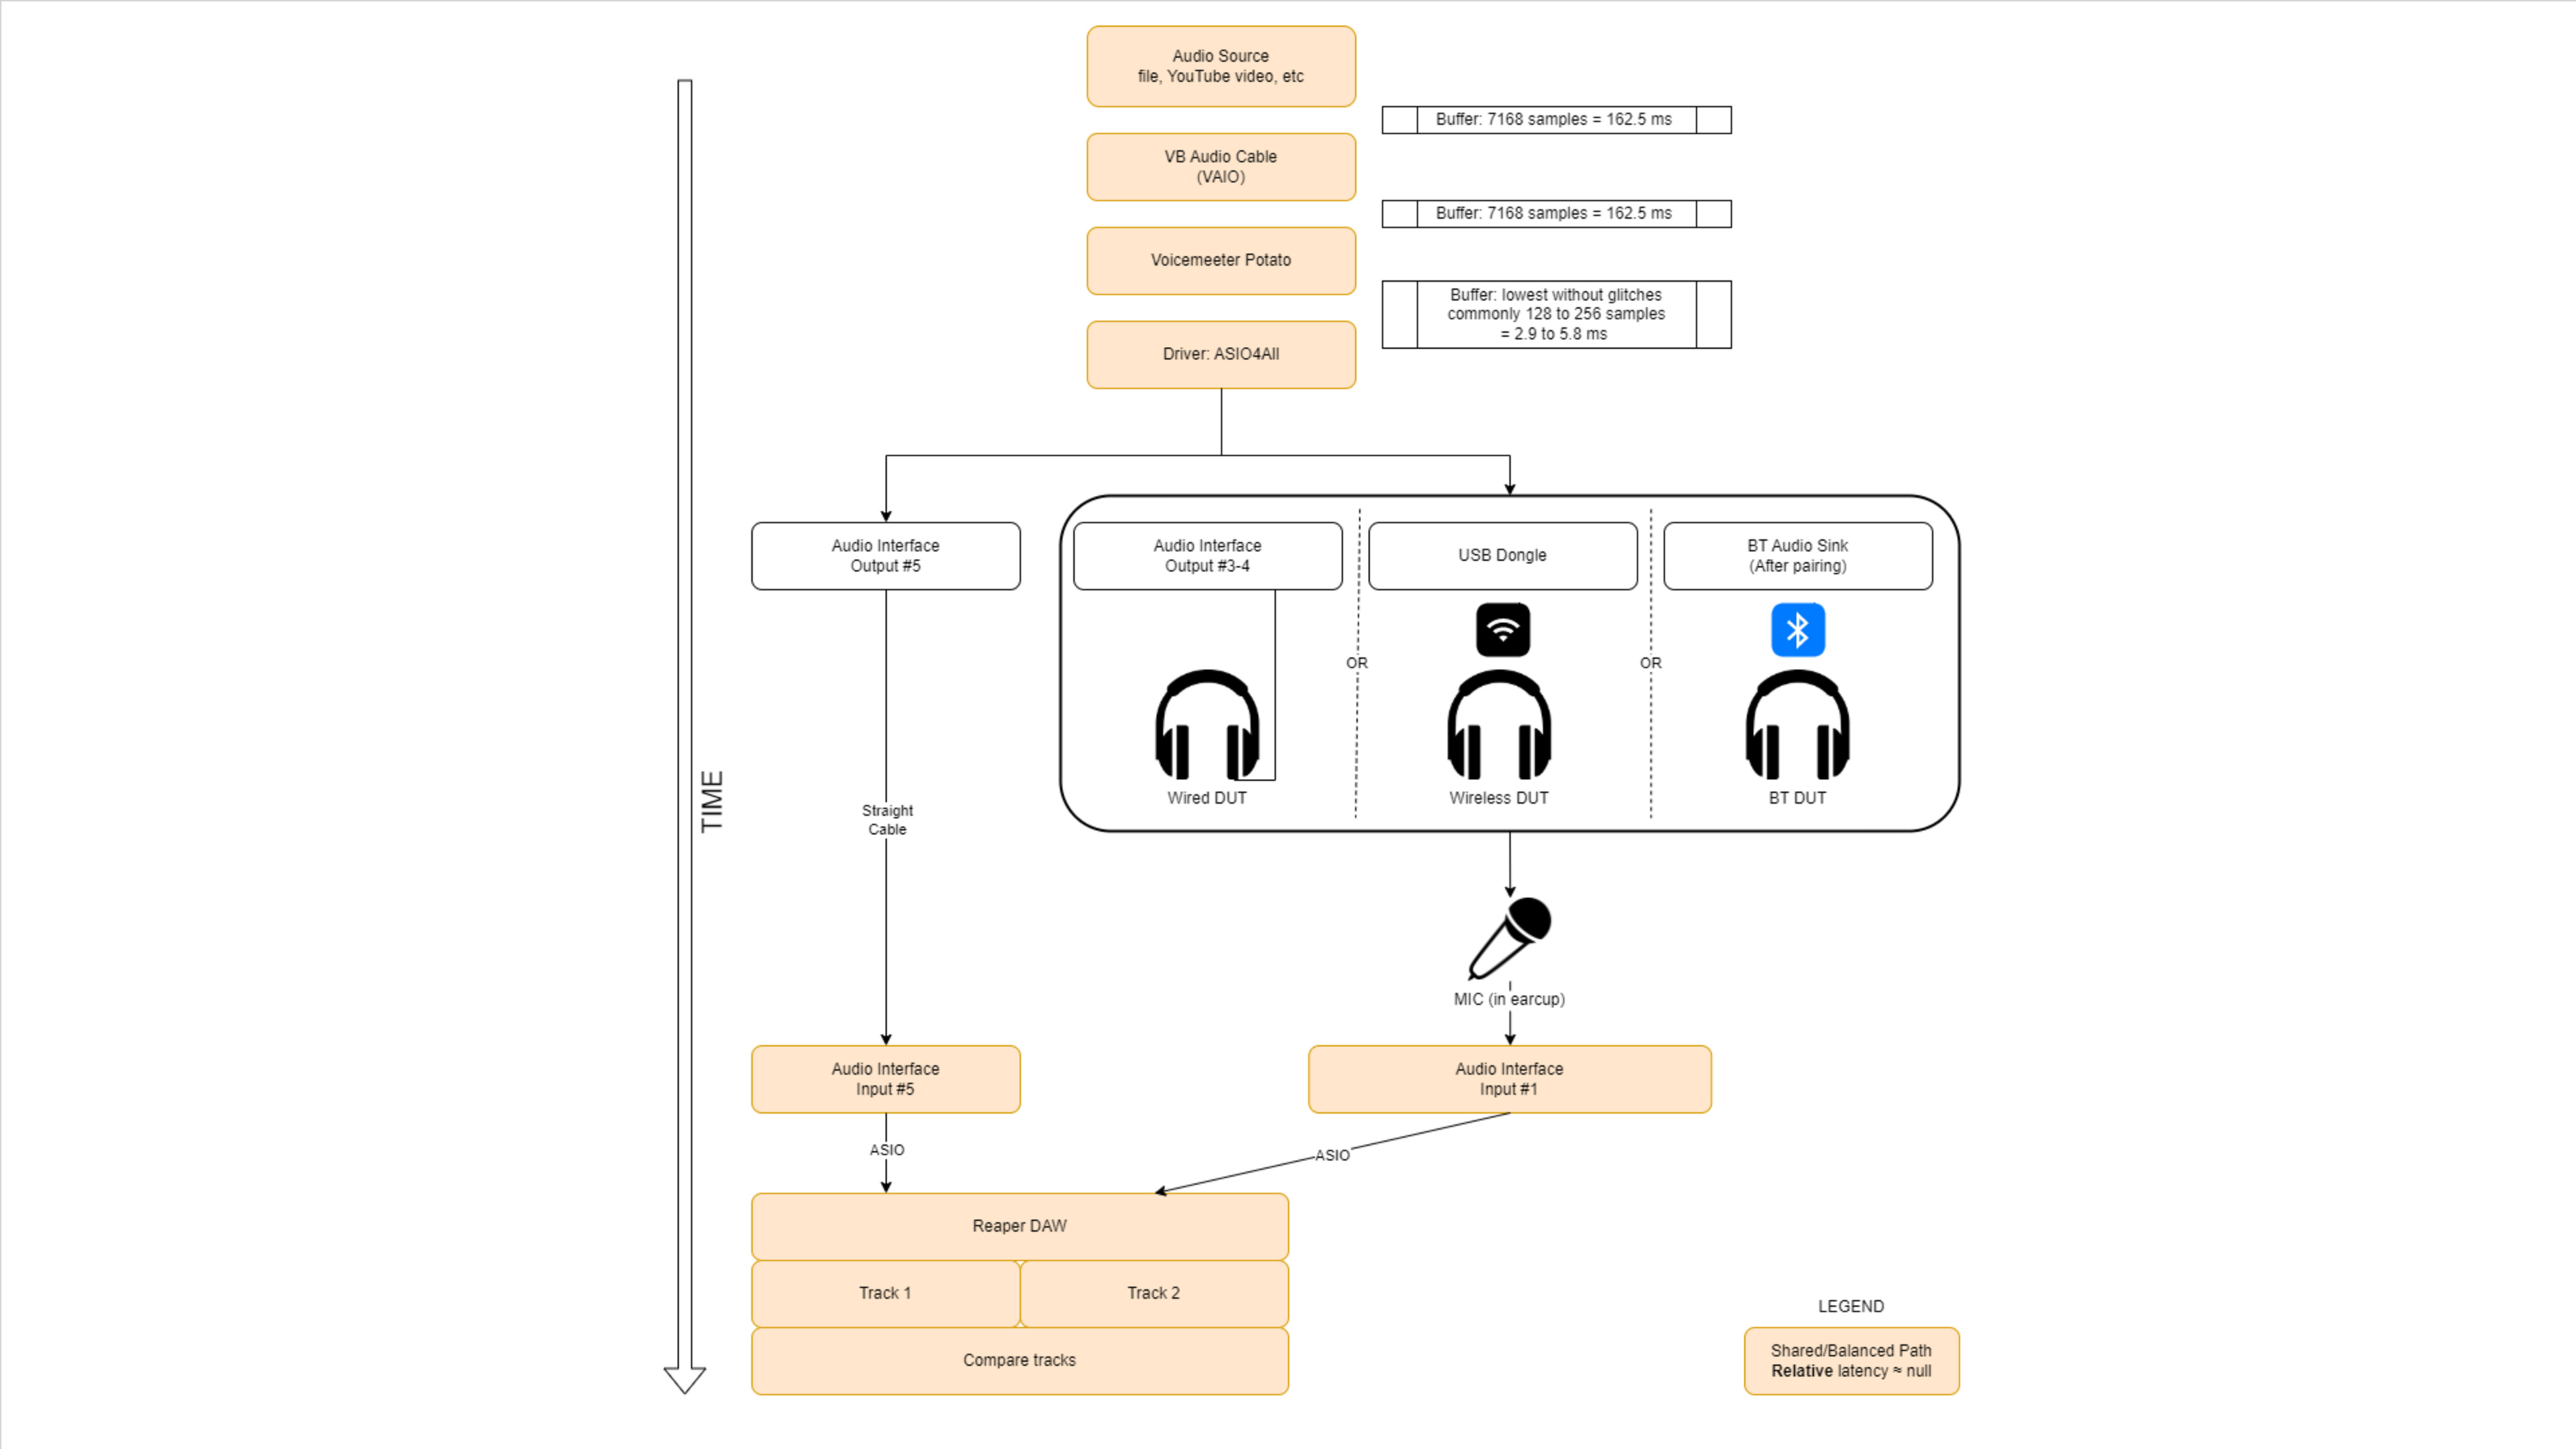 Our full latency set up diagram.